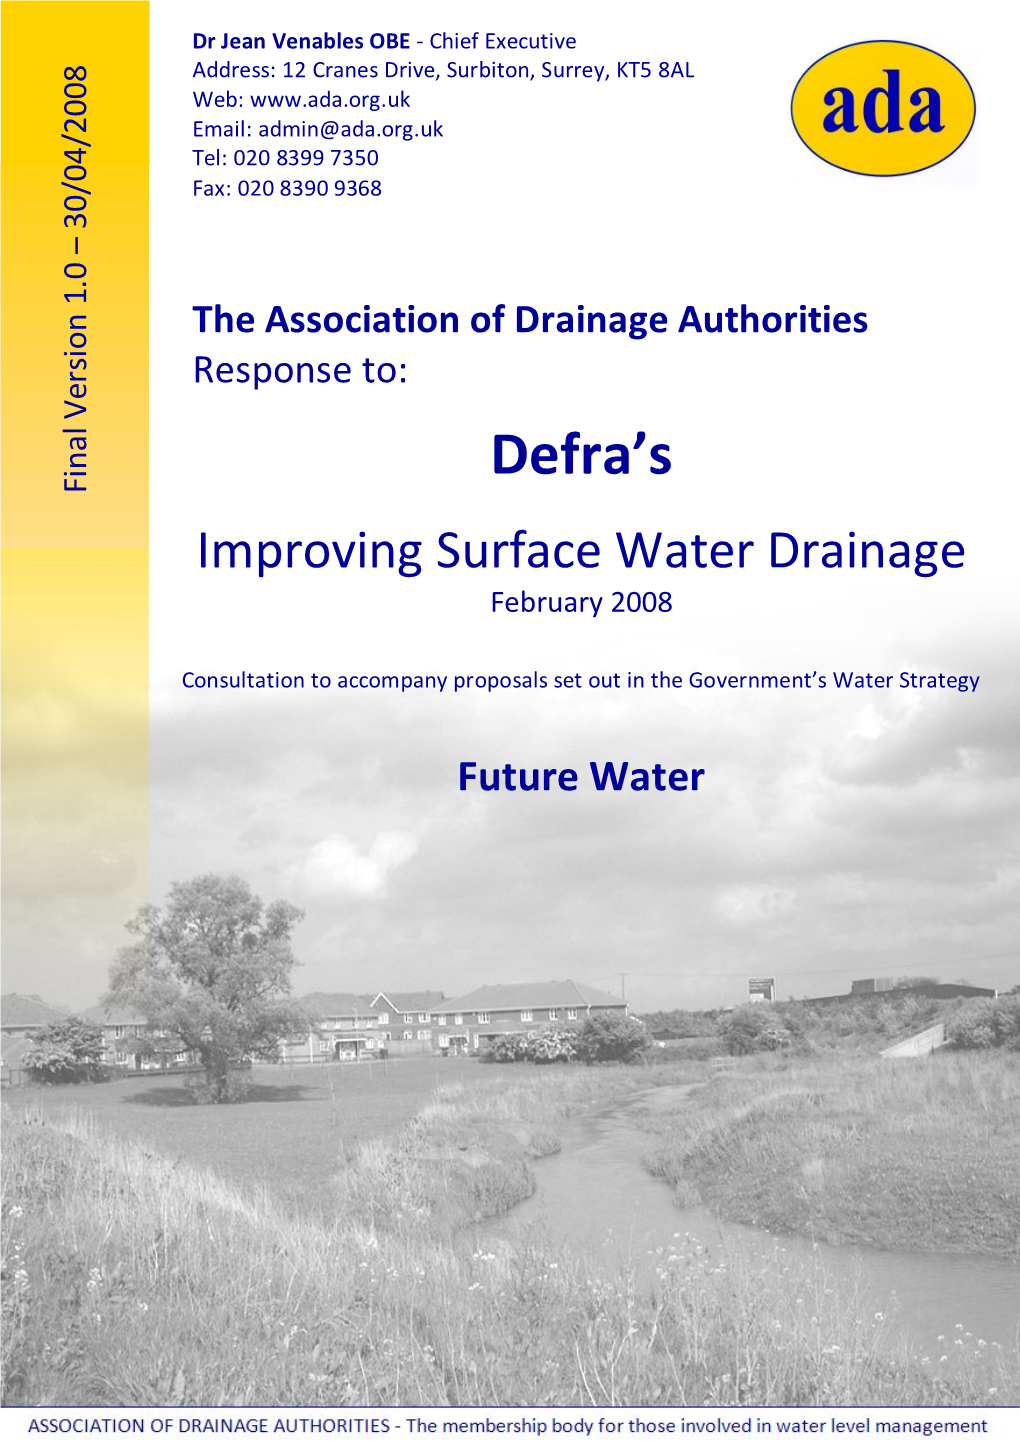 ADA Response to Defra's Improving Surface Water Drainage Consultation